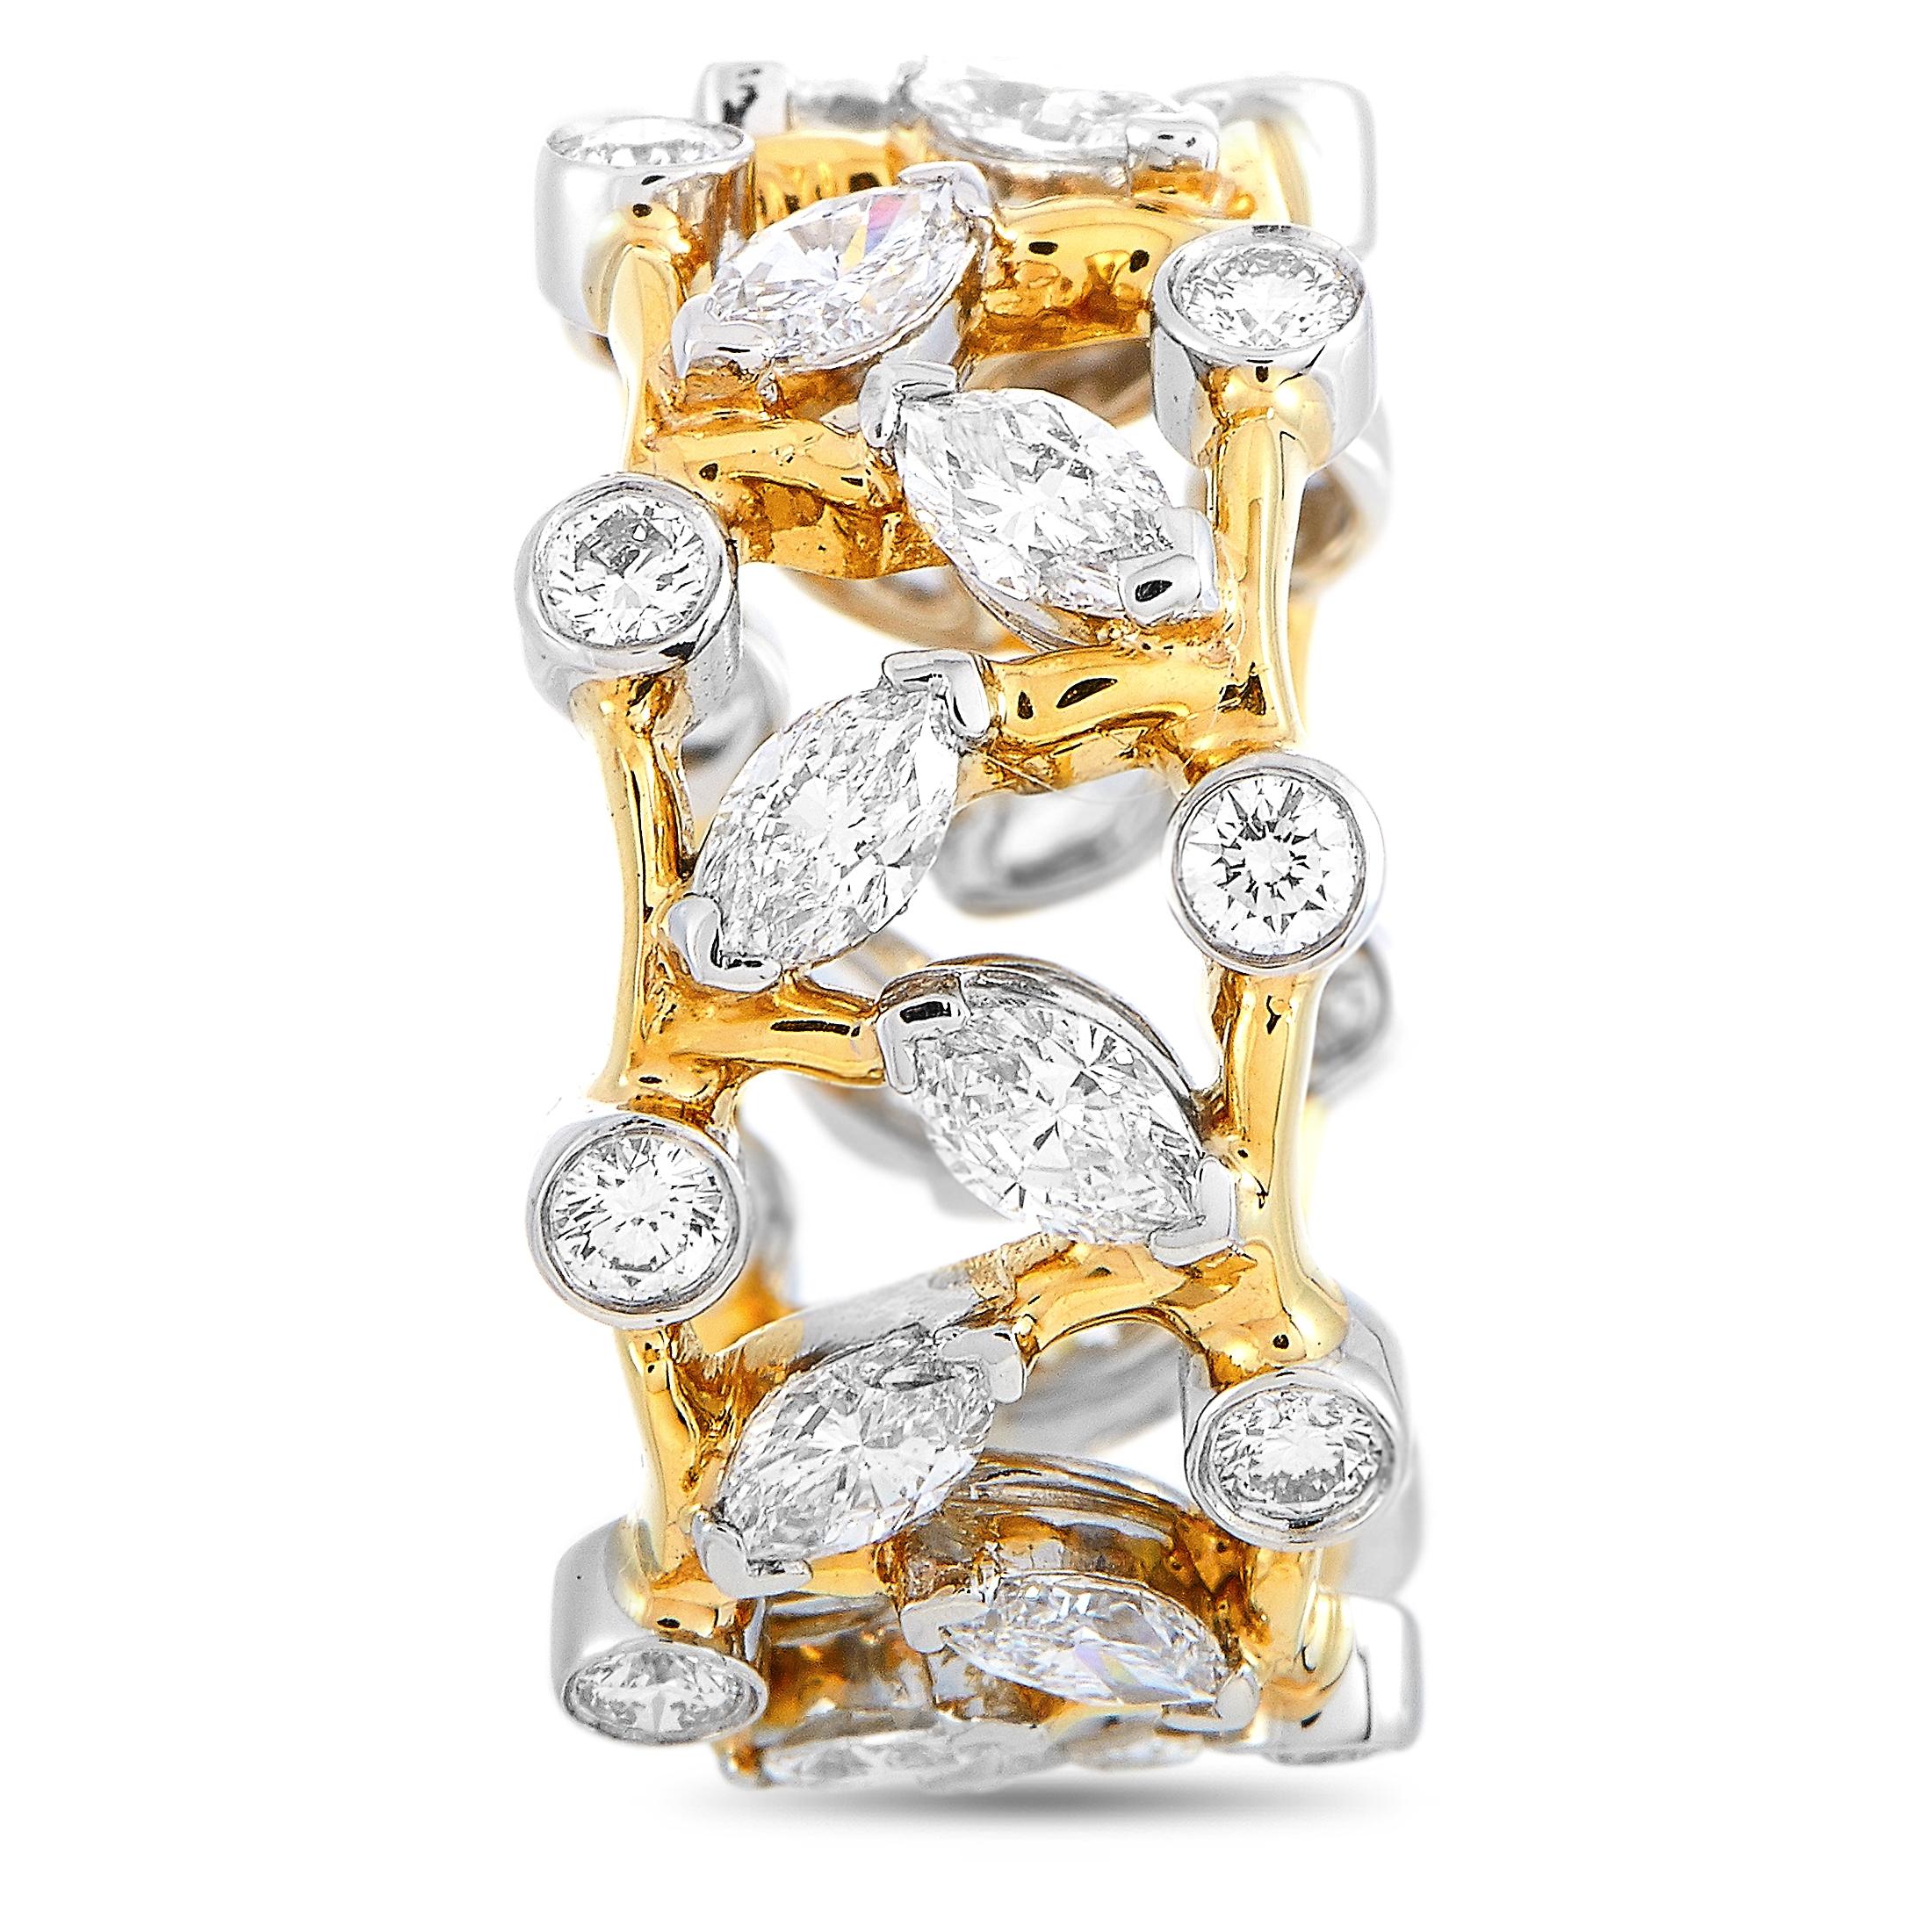 This Tiffany & Co. Schlumberger ring is made out of 18K yellow gold and platinum and weighs 10 grams, boasting band thickness of 10 mm. The ring is set with round and marquise diamonds that feature grade F color and VS1 clarity and total